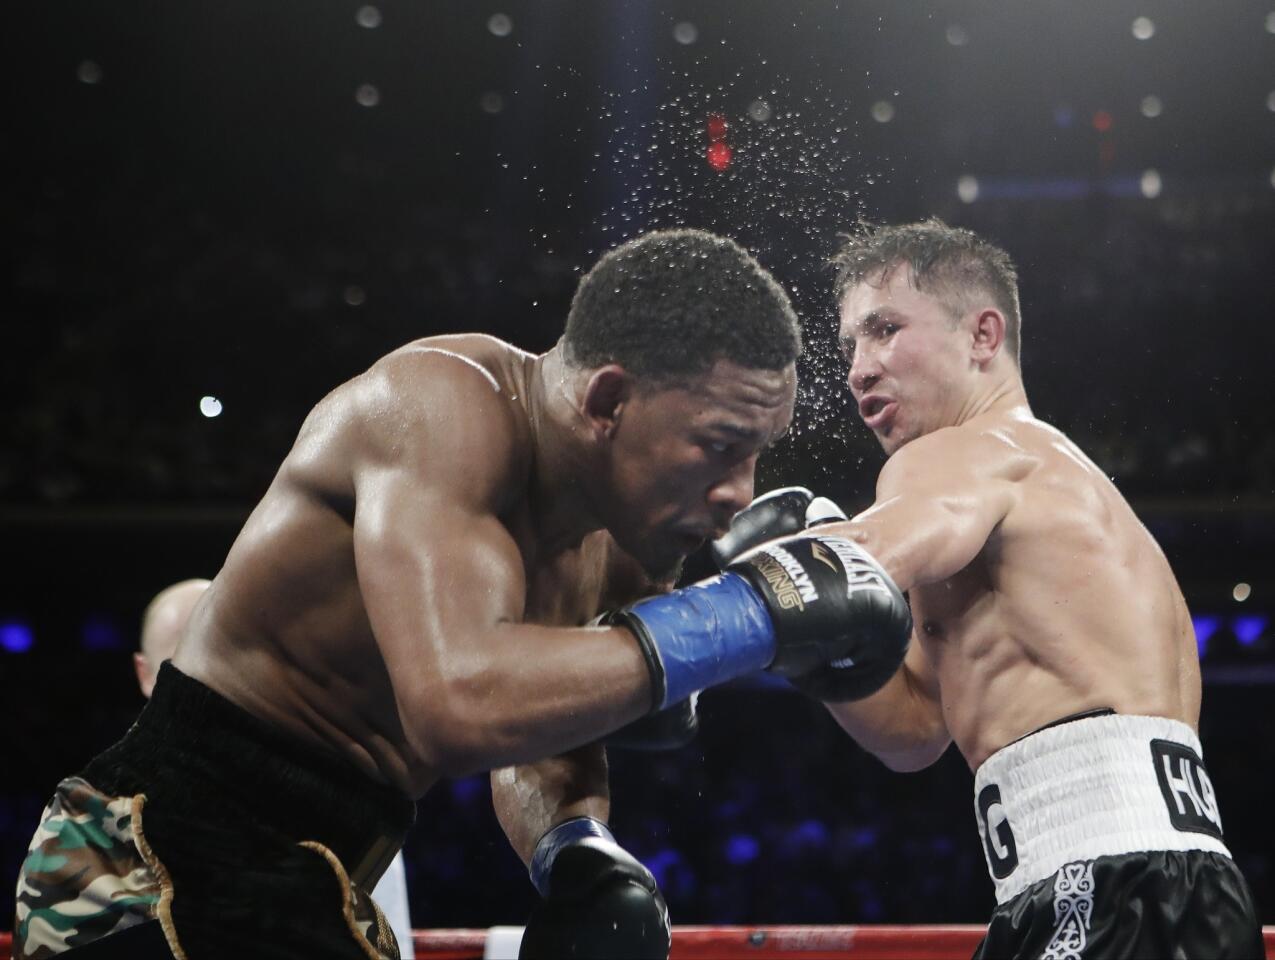 Gennady Golovkin, right, of Kazakhstan, hits Daniel Jacobs during the 12th round of a middleweight boxing match early Sunday, March 19, 2017, in New York. Golovkin won the fight. (AP Photo/Frank Franklin II)